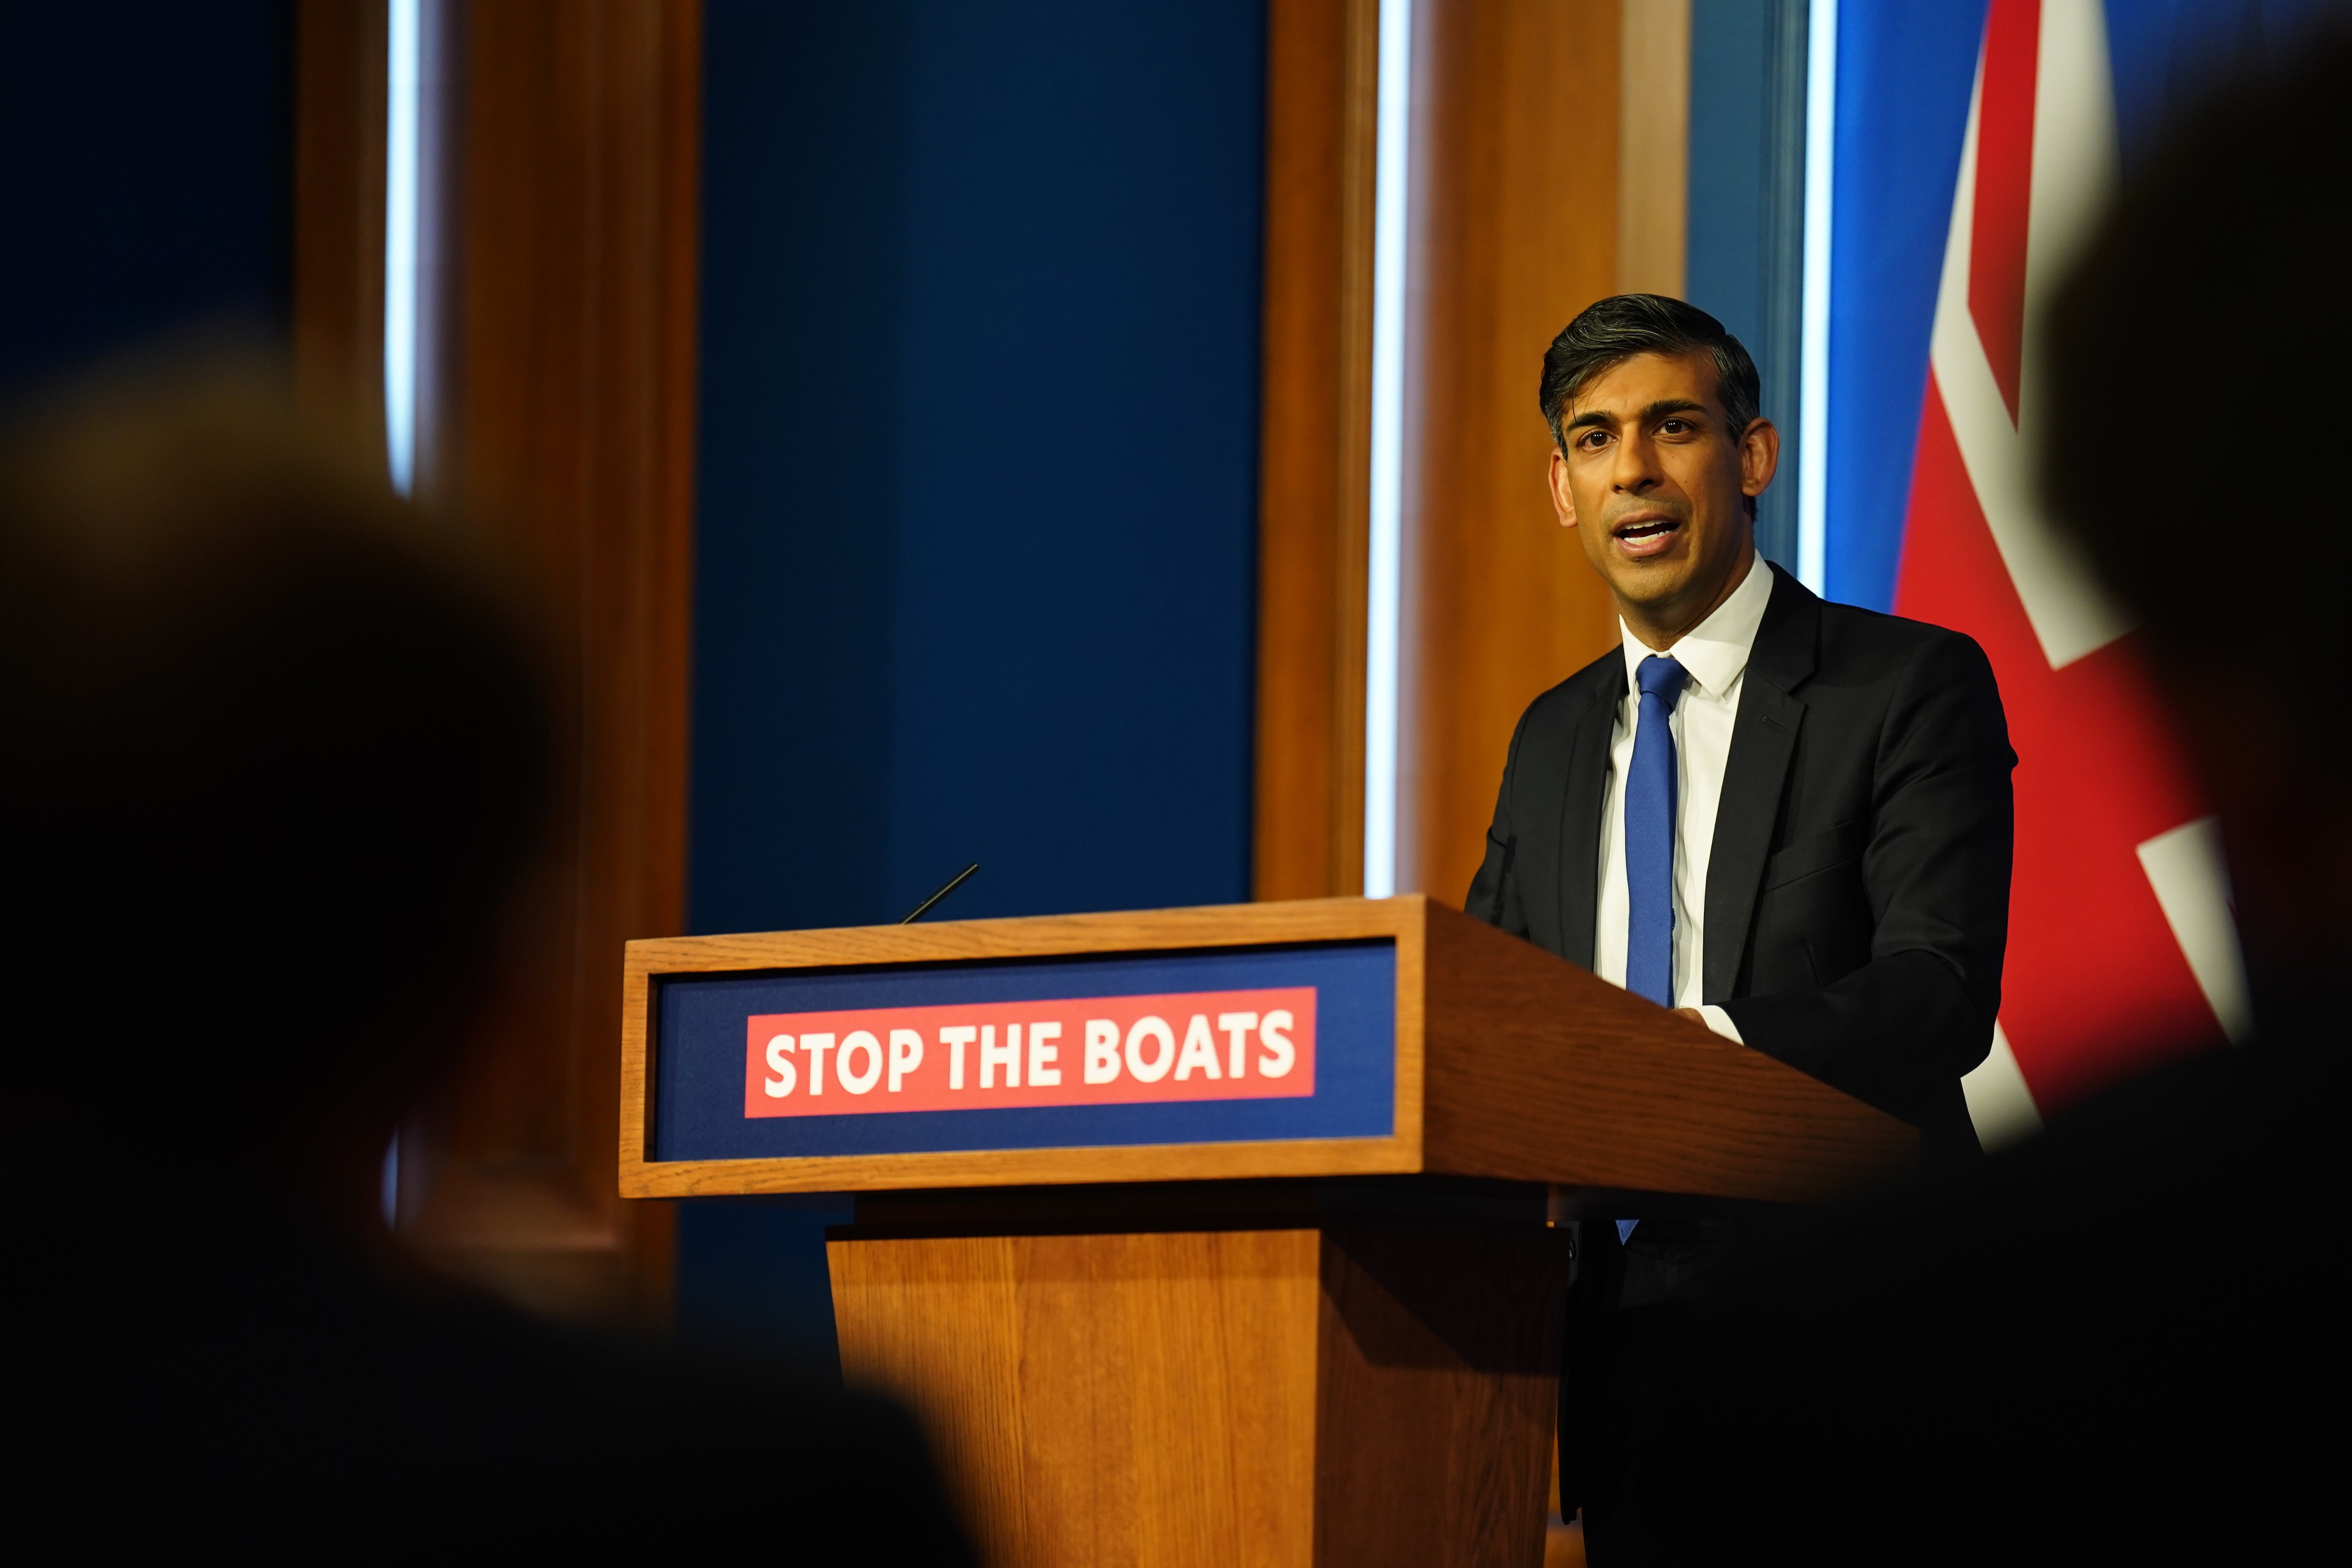 Prime Minister Rishi Sunak made five key pledges, including to “stop the boats”, last year (James Manning/PA)